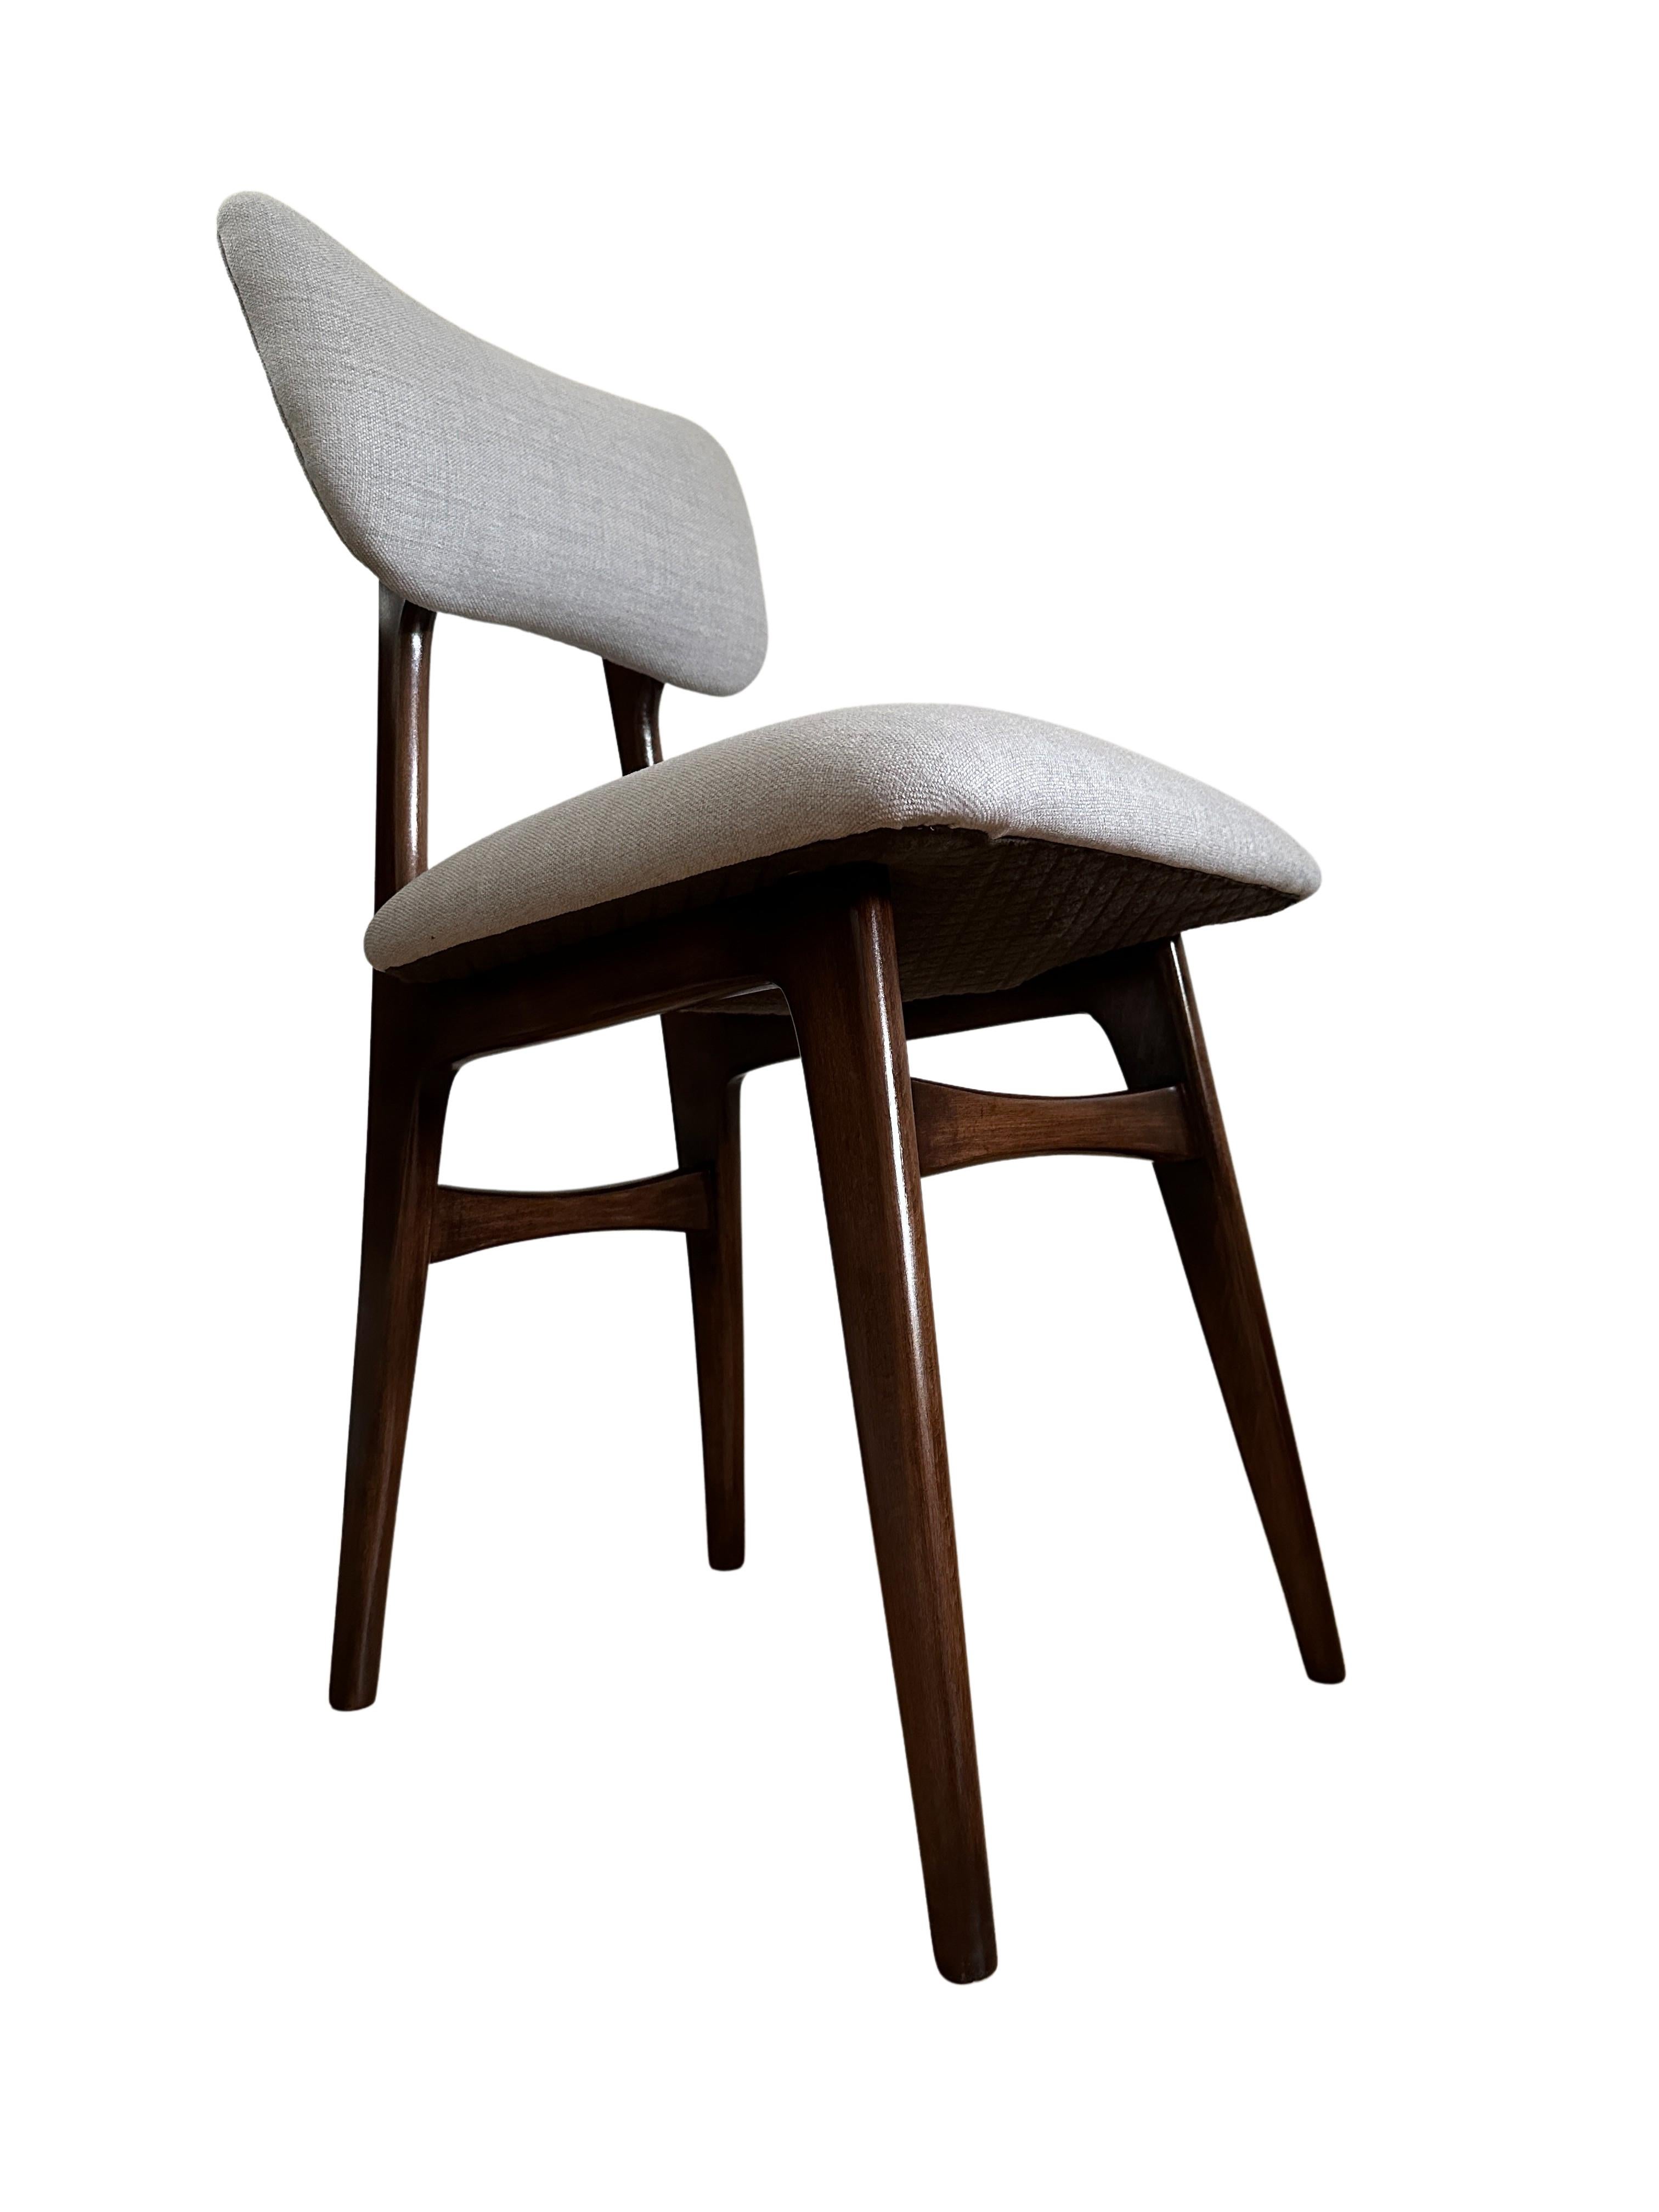 Unique set of six chairs manufactured in Poland in the 1960s, designed by Rajmund Halas. 

The upholstery is made of premium fabric with an interesting structure of thickly woven canvas, nice and soft to the touch. The fabric is covered with a